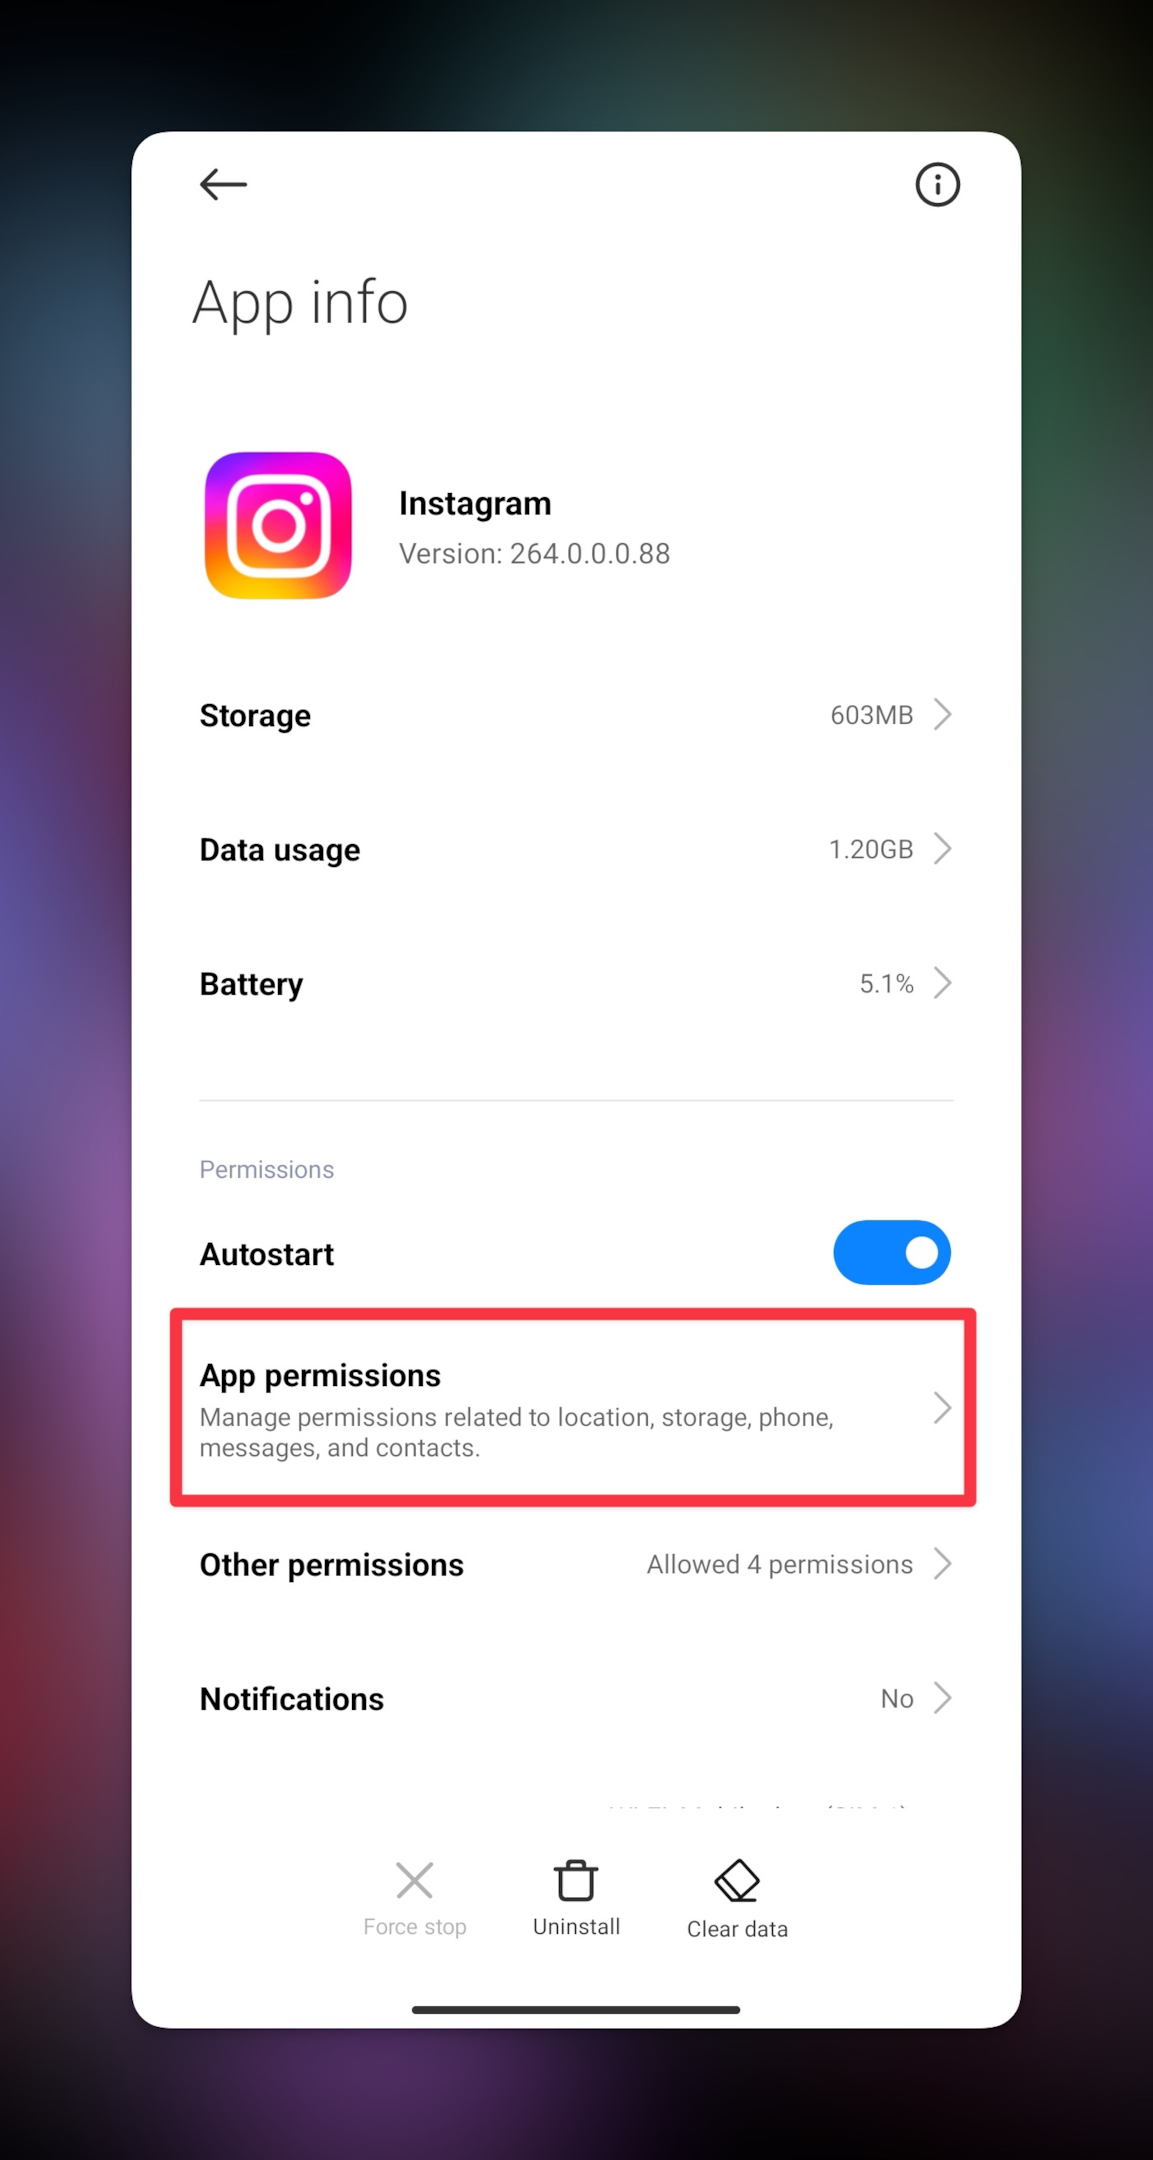 Remote.tools shows how to allow or deny permissions for any app on Android